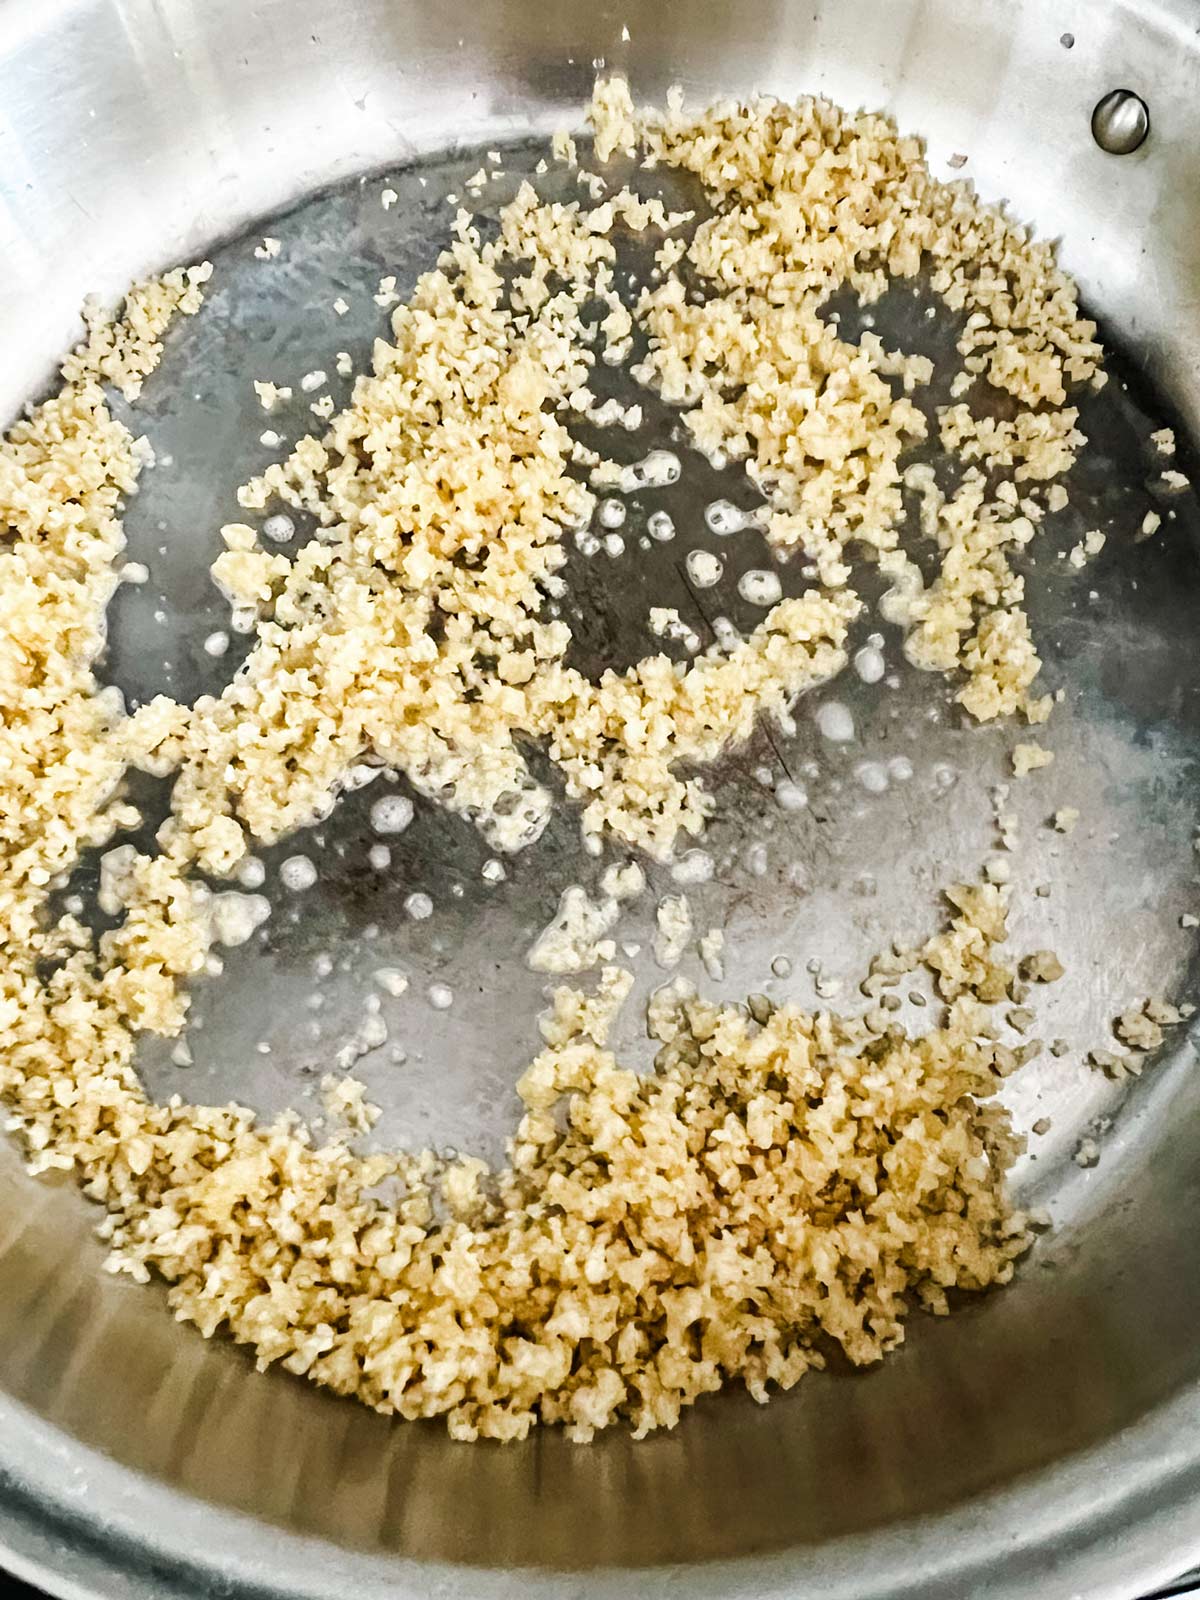 Toasted breadcrumbs in a skillet.